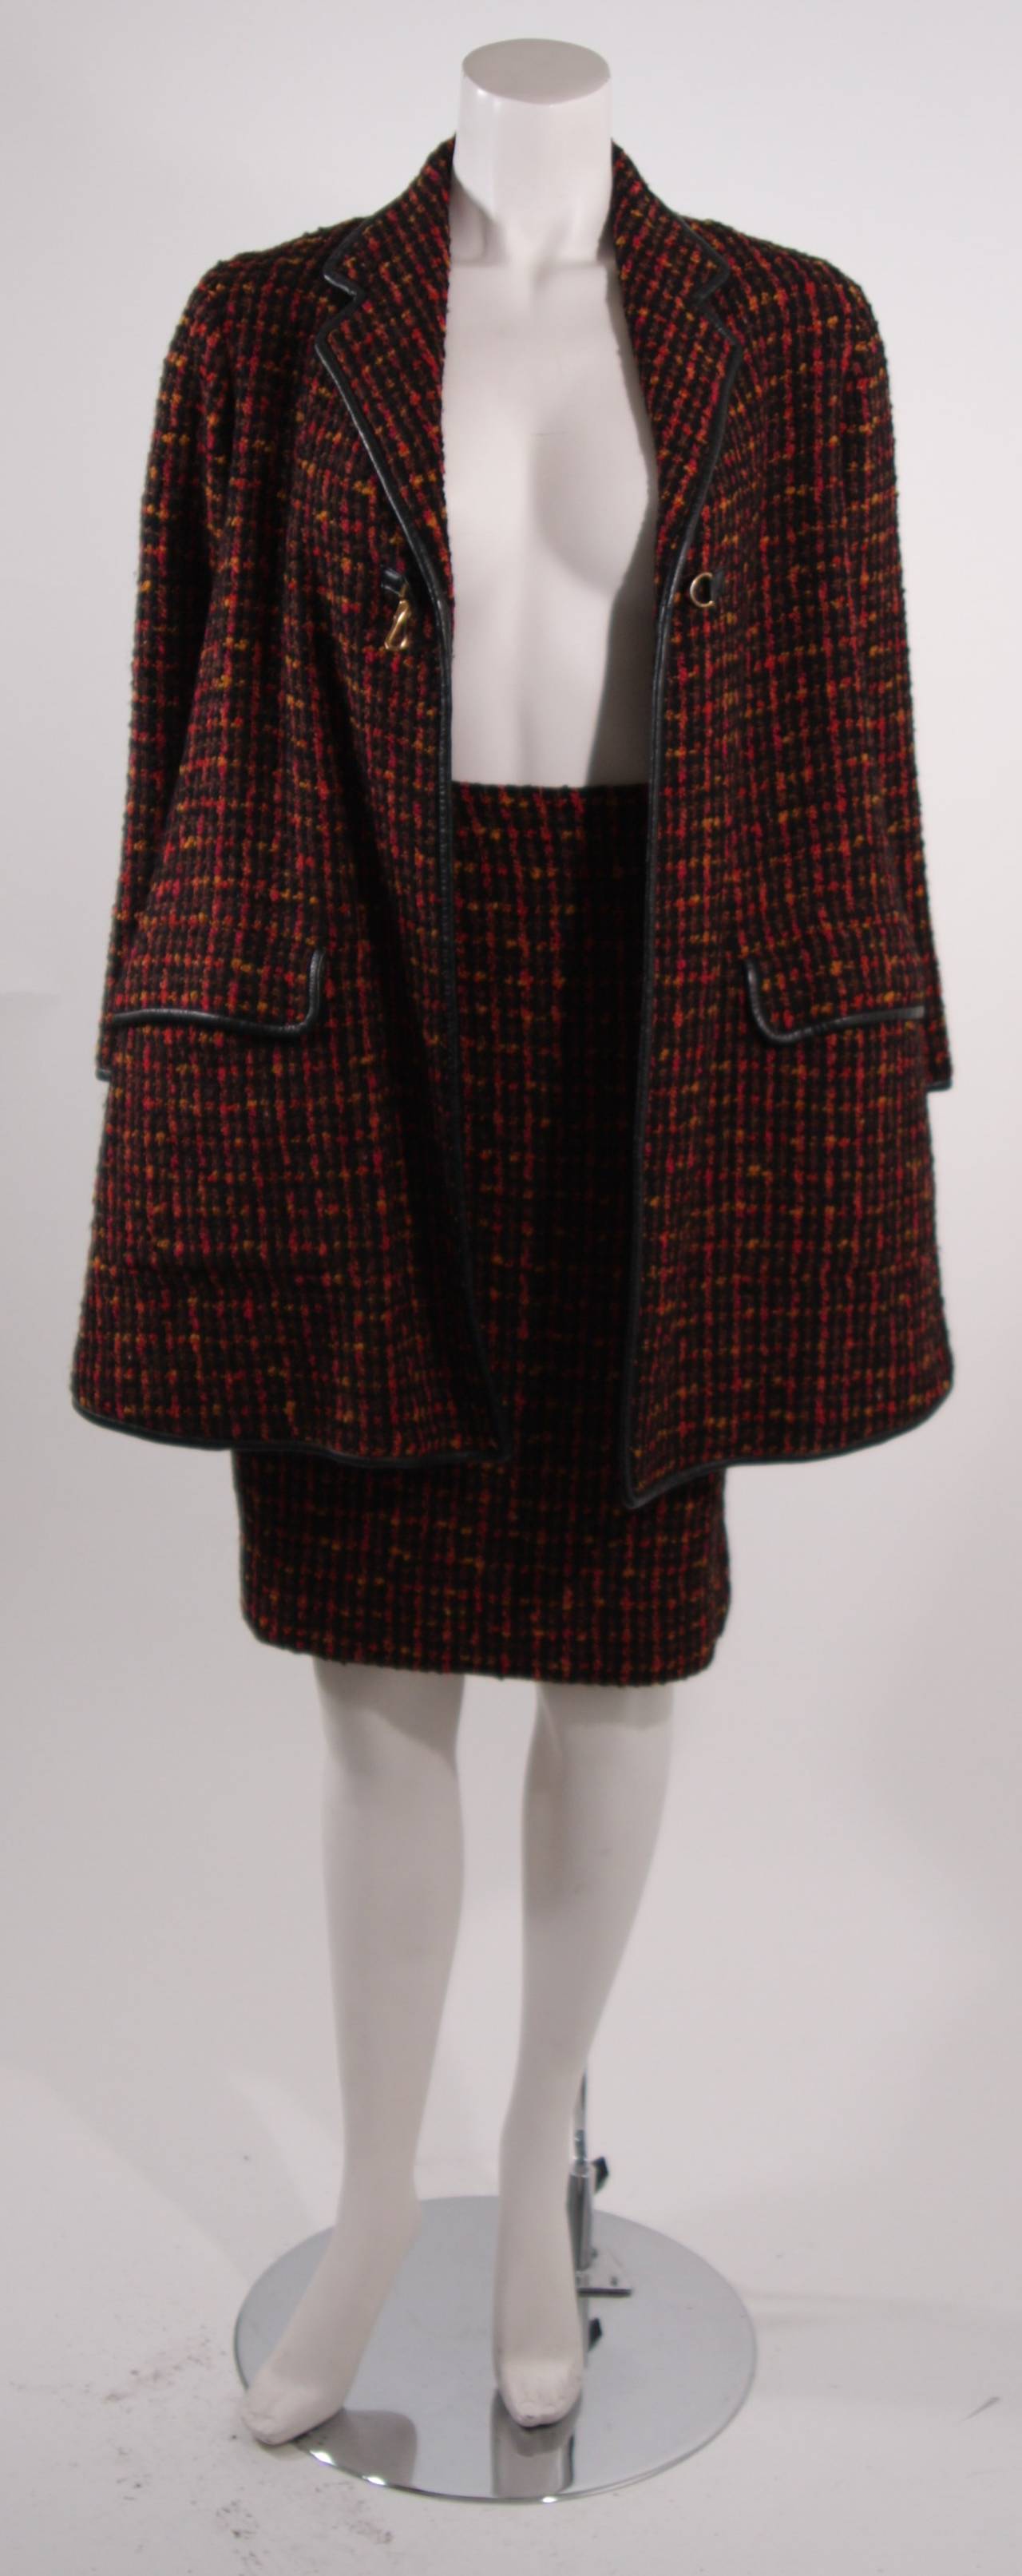 This a Bonnie Cashin design. This sharp two piece features an over-sized coat with two front pockets and gold hardware. The skirt a wonderful pencil silhouette with a zipper closure. Composed of a lovely multi-colored tweed featuring yellow, red,